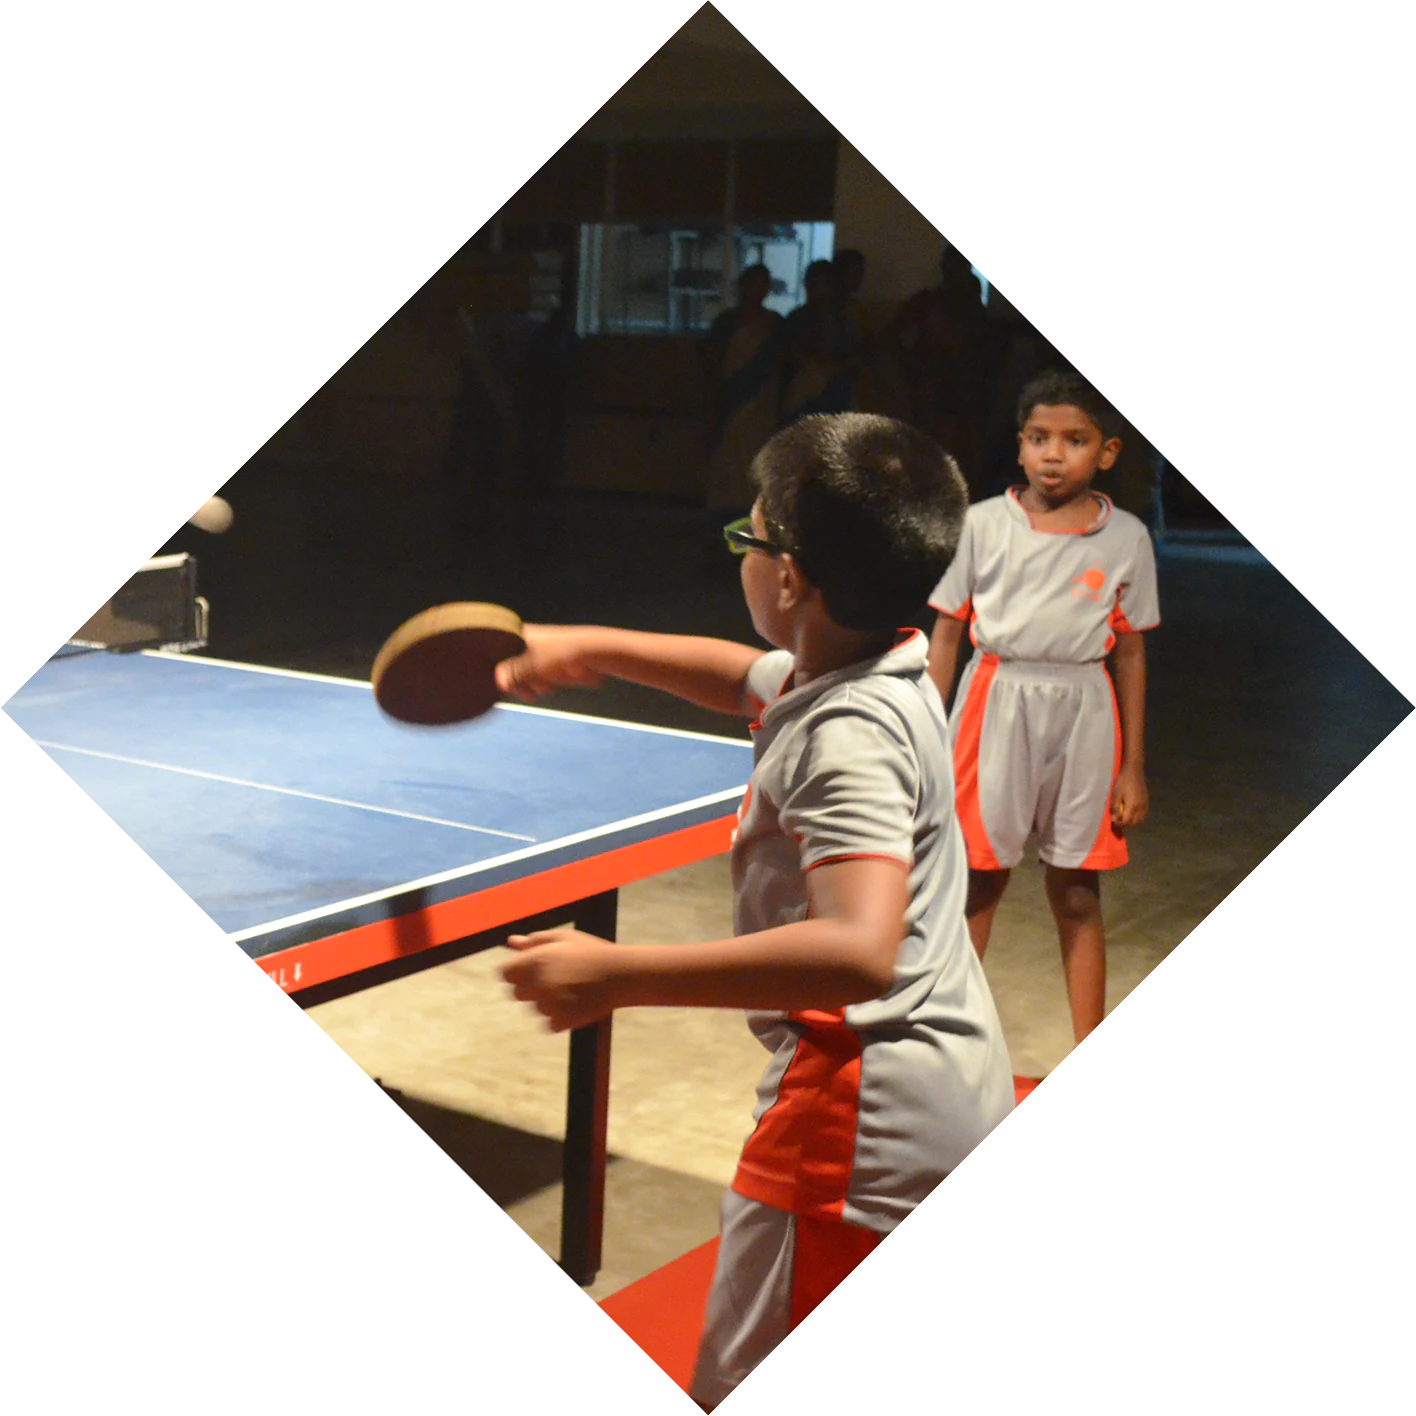 30+ indoor at outdoor sports at amalorpavam